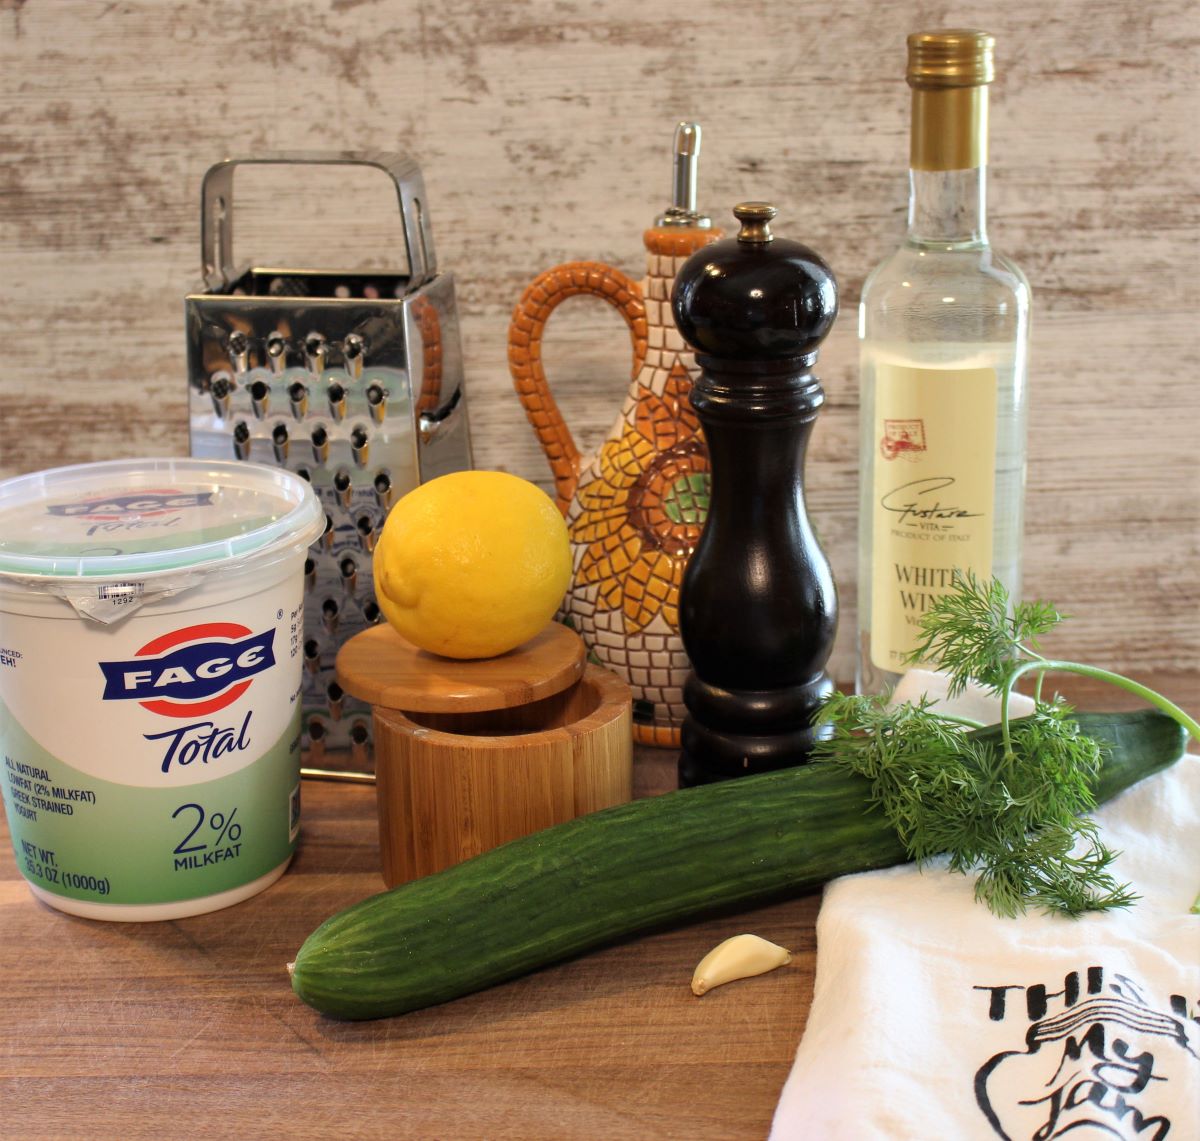 The ingredients needed to make tzatziki for chicken burger pita pockets are Fage Greek Yogurt, lemon juice, cucumbers, white wine vinegar, extra virgin olive oil, garlic, fresh dill, salt and pepper. Supplies needed are a box grater for shredding the cucumber and a tea towel for wringing out the juice of the cucumber.